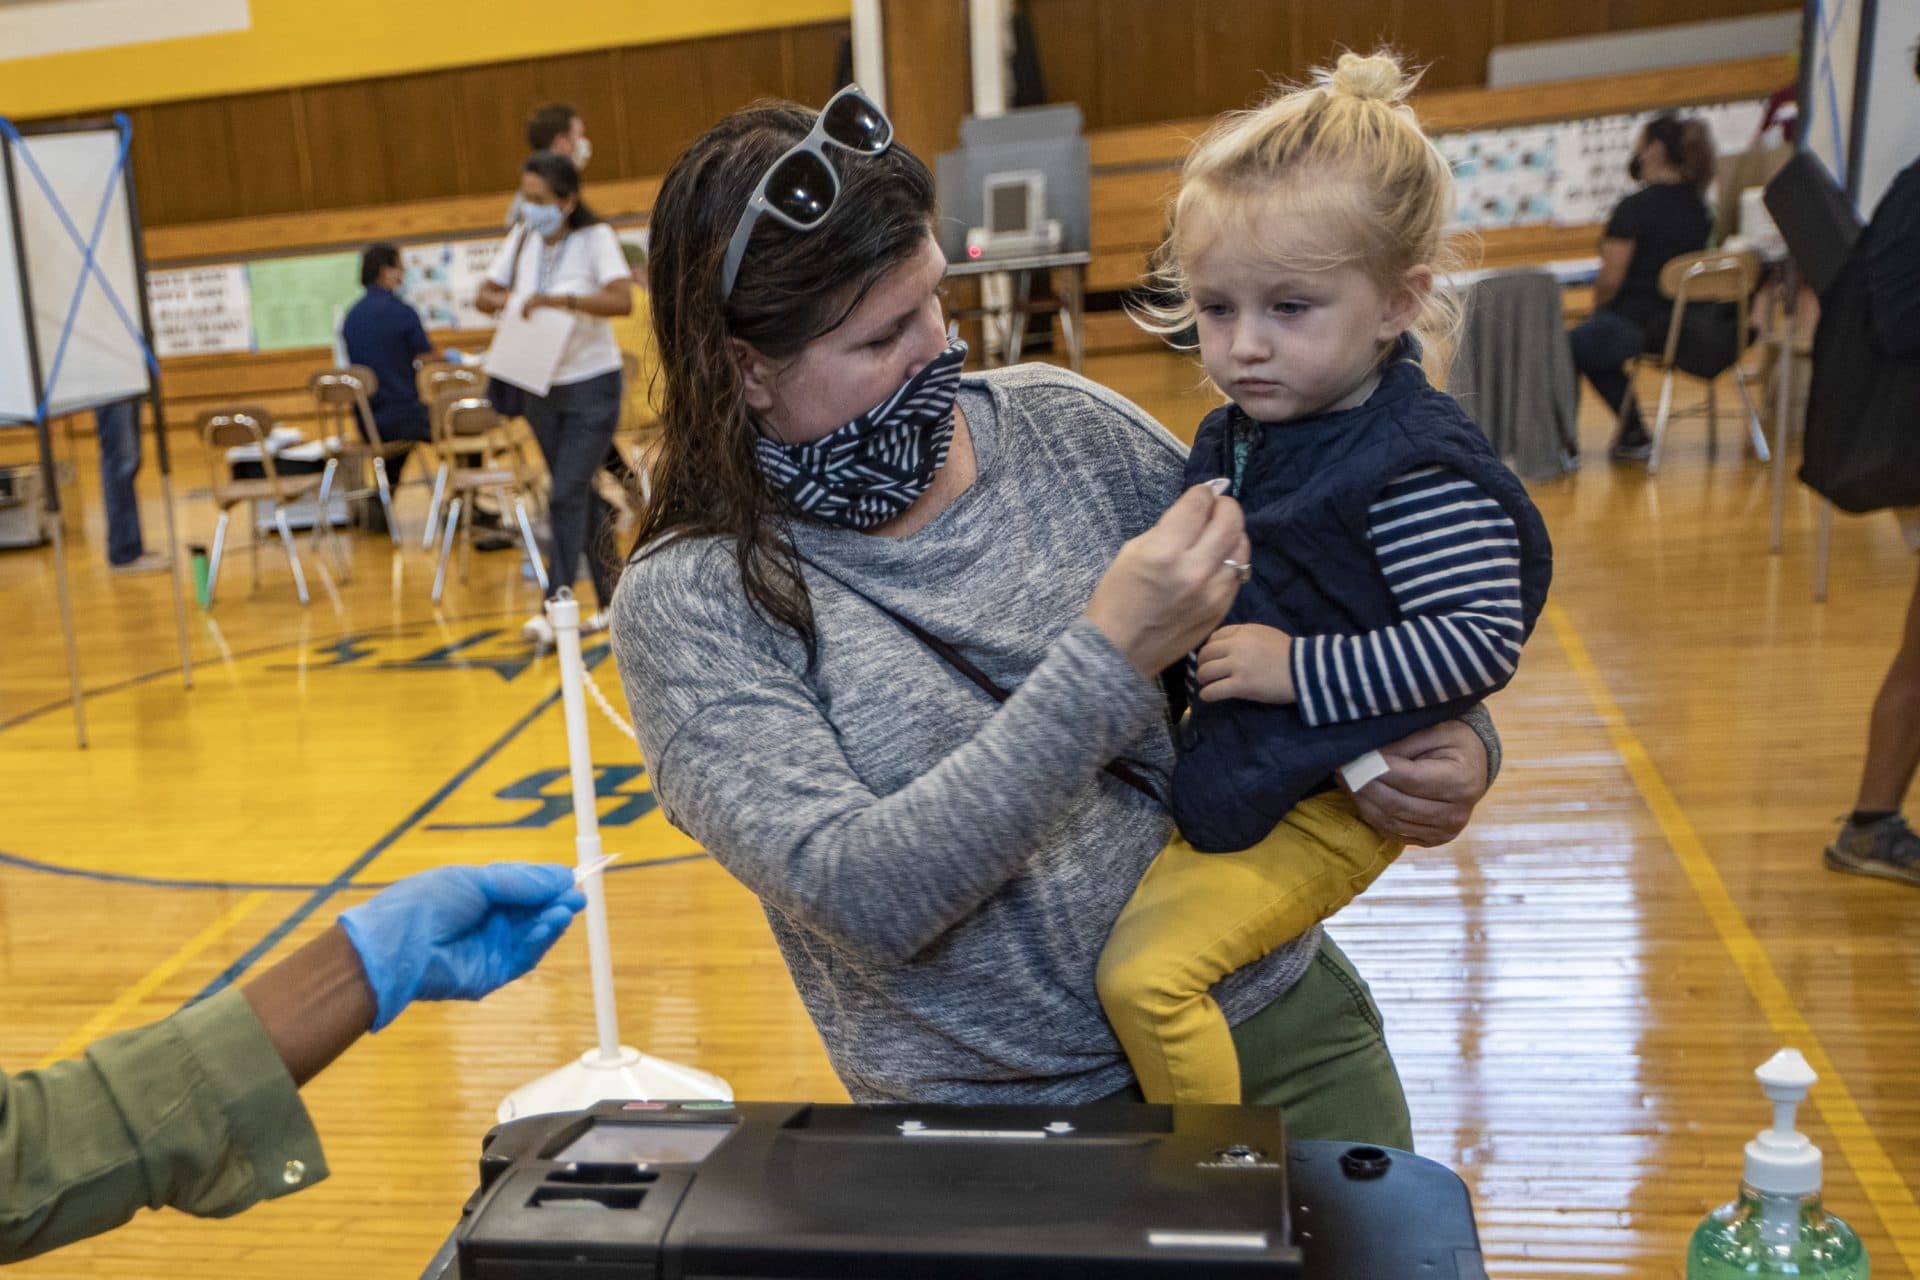 Two-year-old Milo Grady gets a voting sticker from her mother after she cast her ballot to vote at Ward 1 in East Boston High School. (Jesse Costa/WBUR)